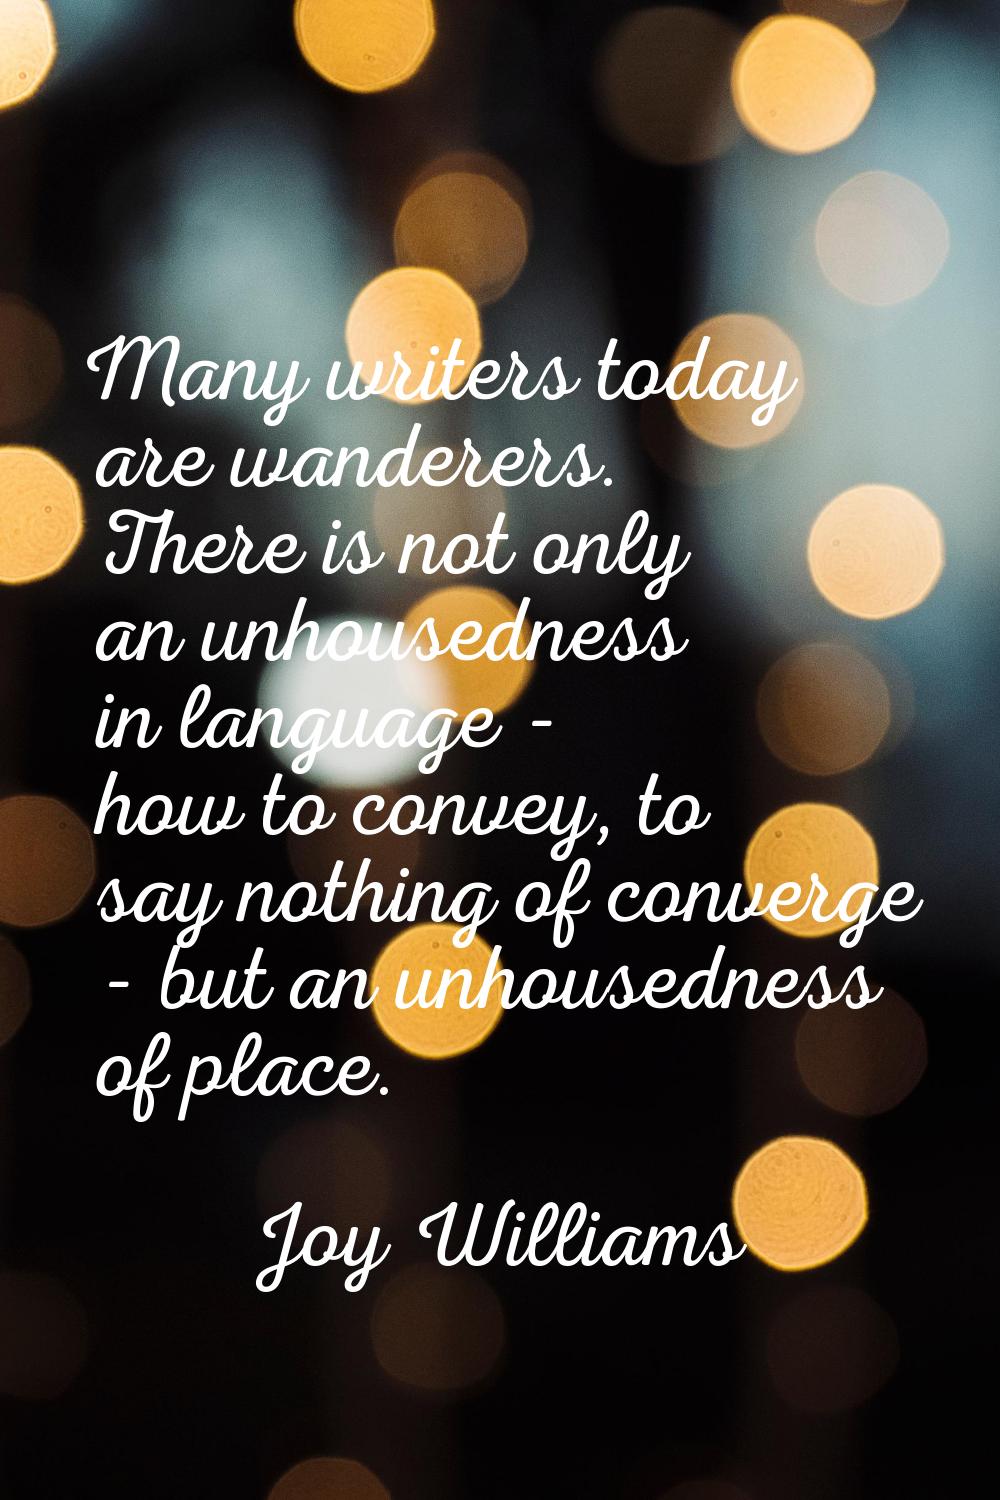 Many writers today are wanderers. There is not only an unhousedness in language - how to convey, to